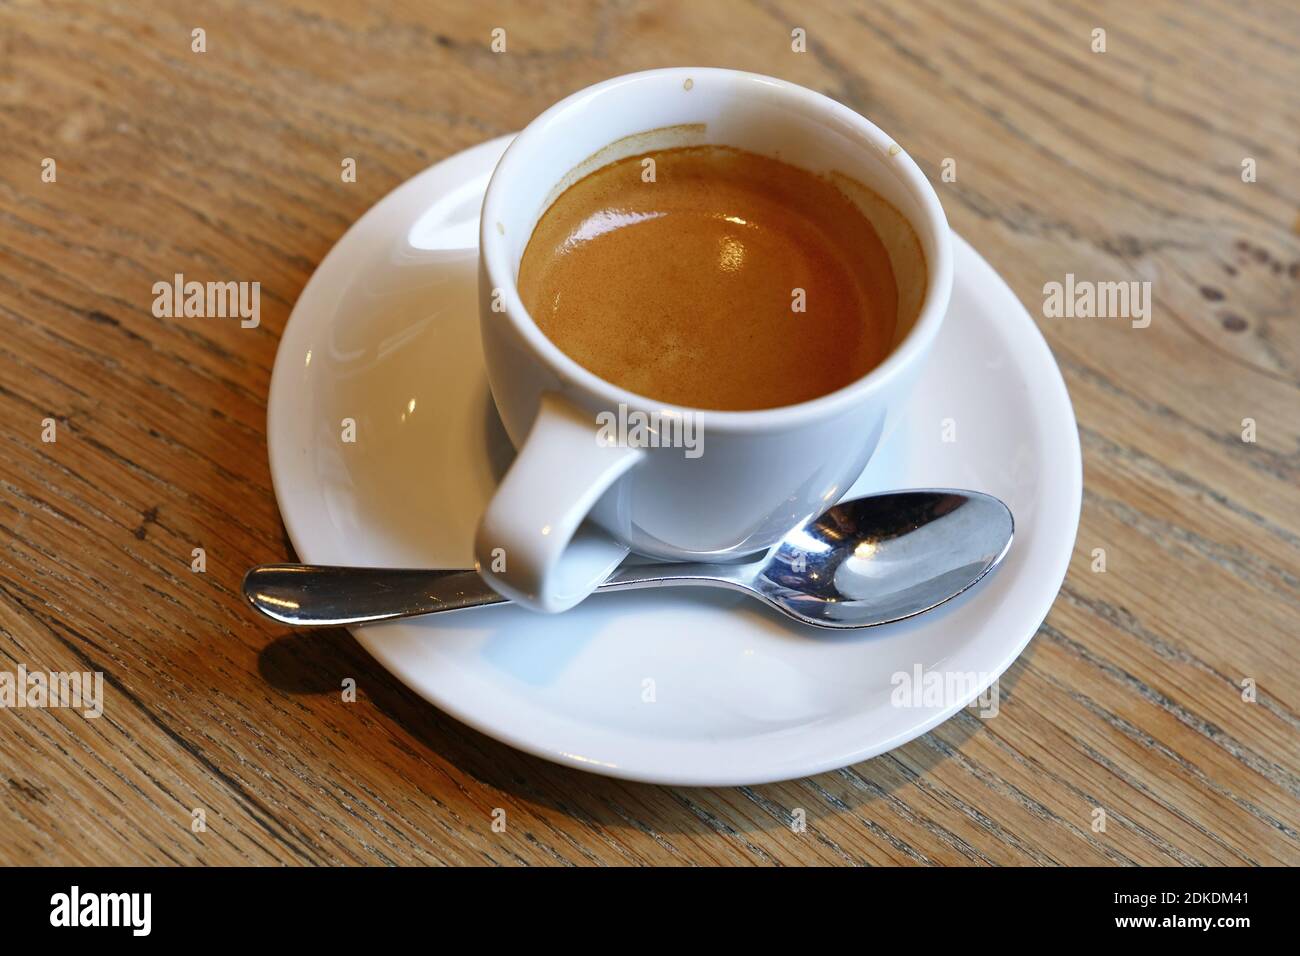 High Angle View Of Coffee On Wooden Table Stock Photo